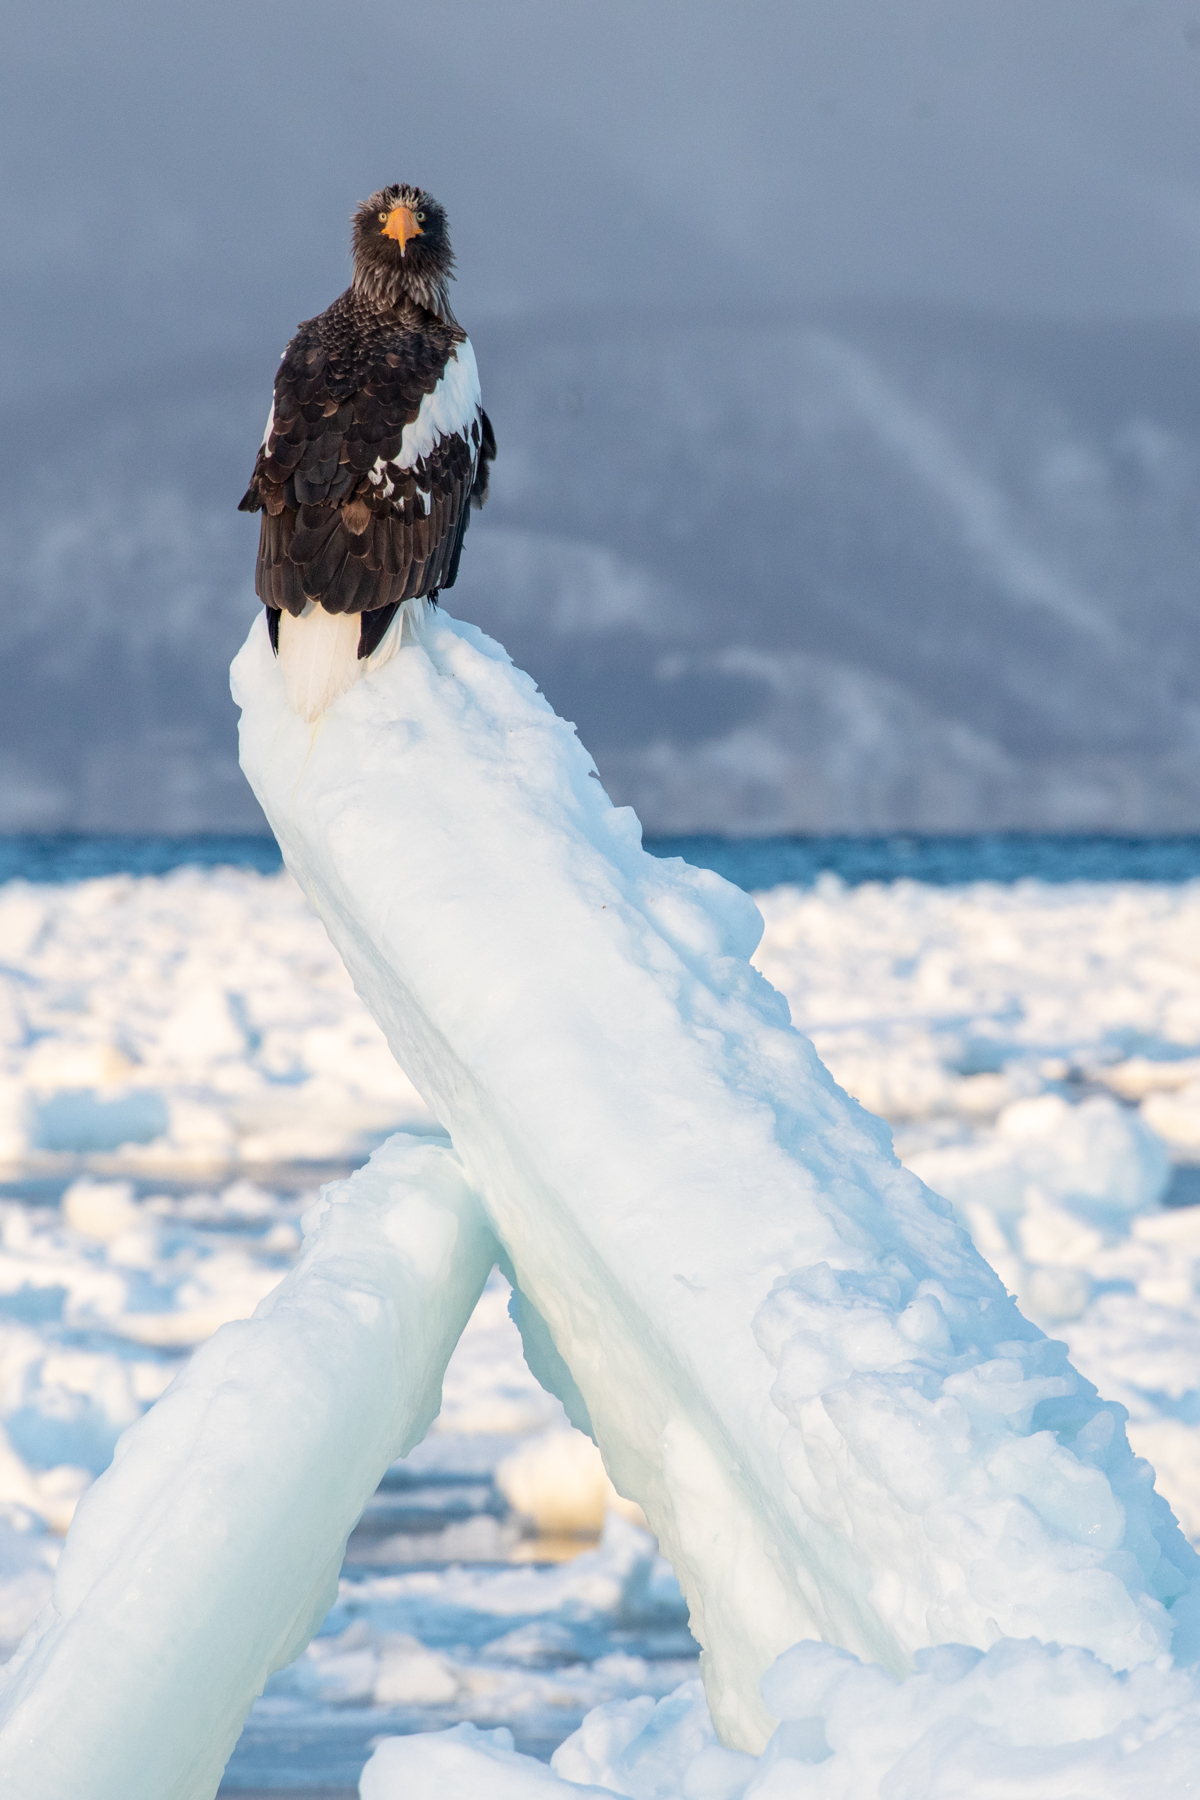 A Steller's Sea Eagle surveys its wintry domain from an upflung block of sea ice (image by Mark Beaman)